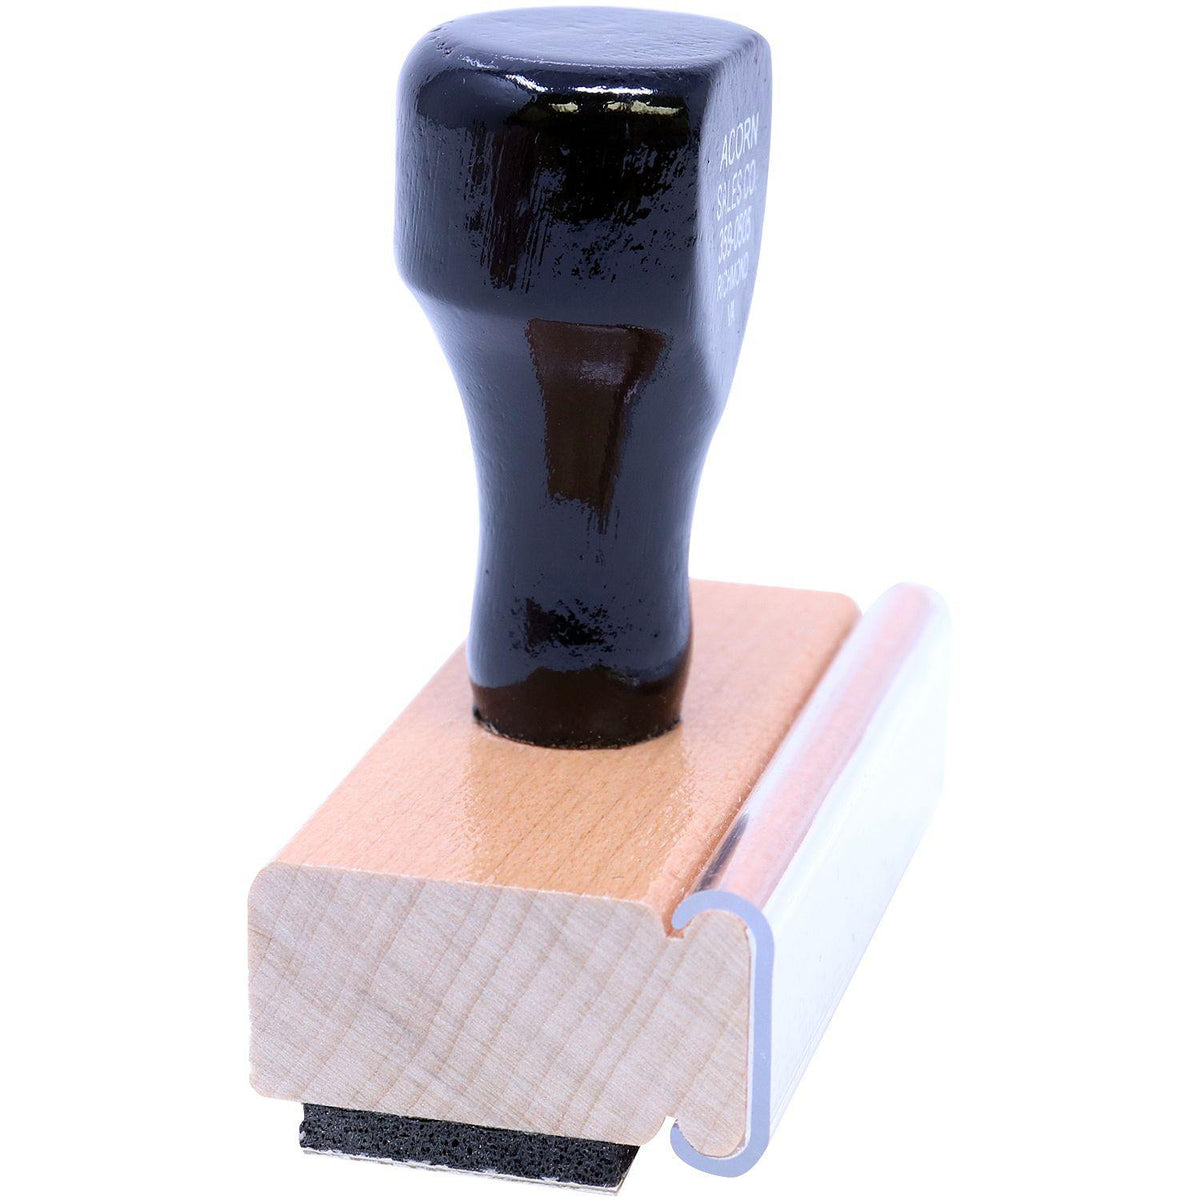 Side View of Trust Dept Rubber Stamp at an Angle